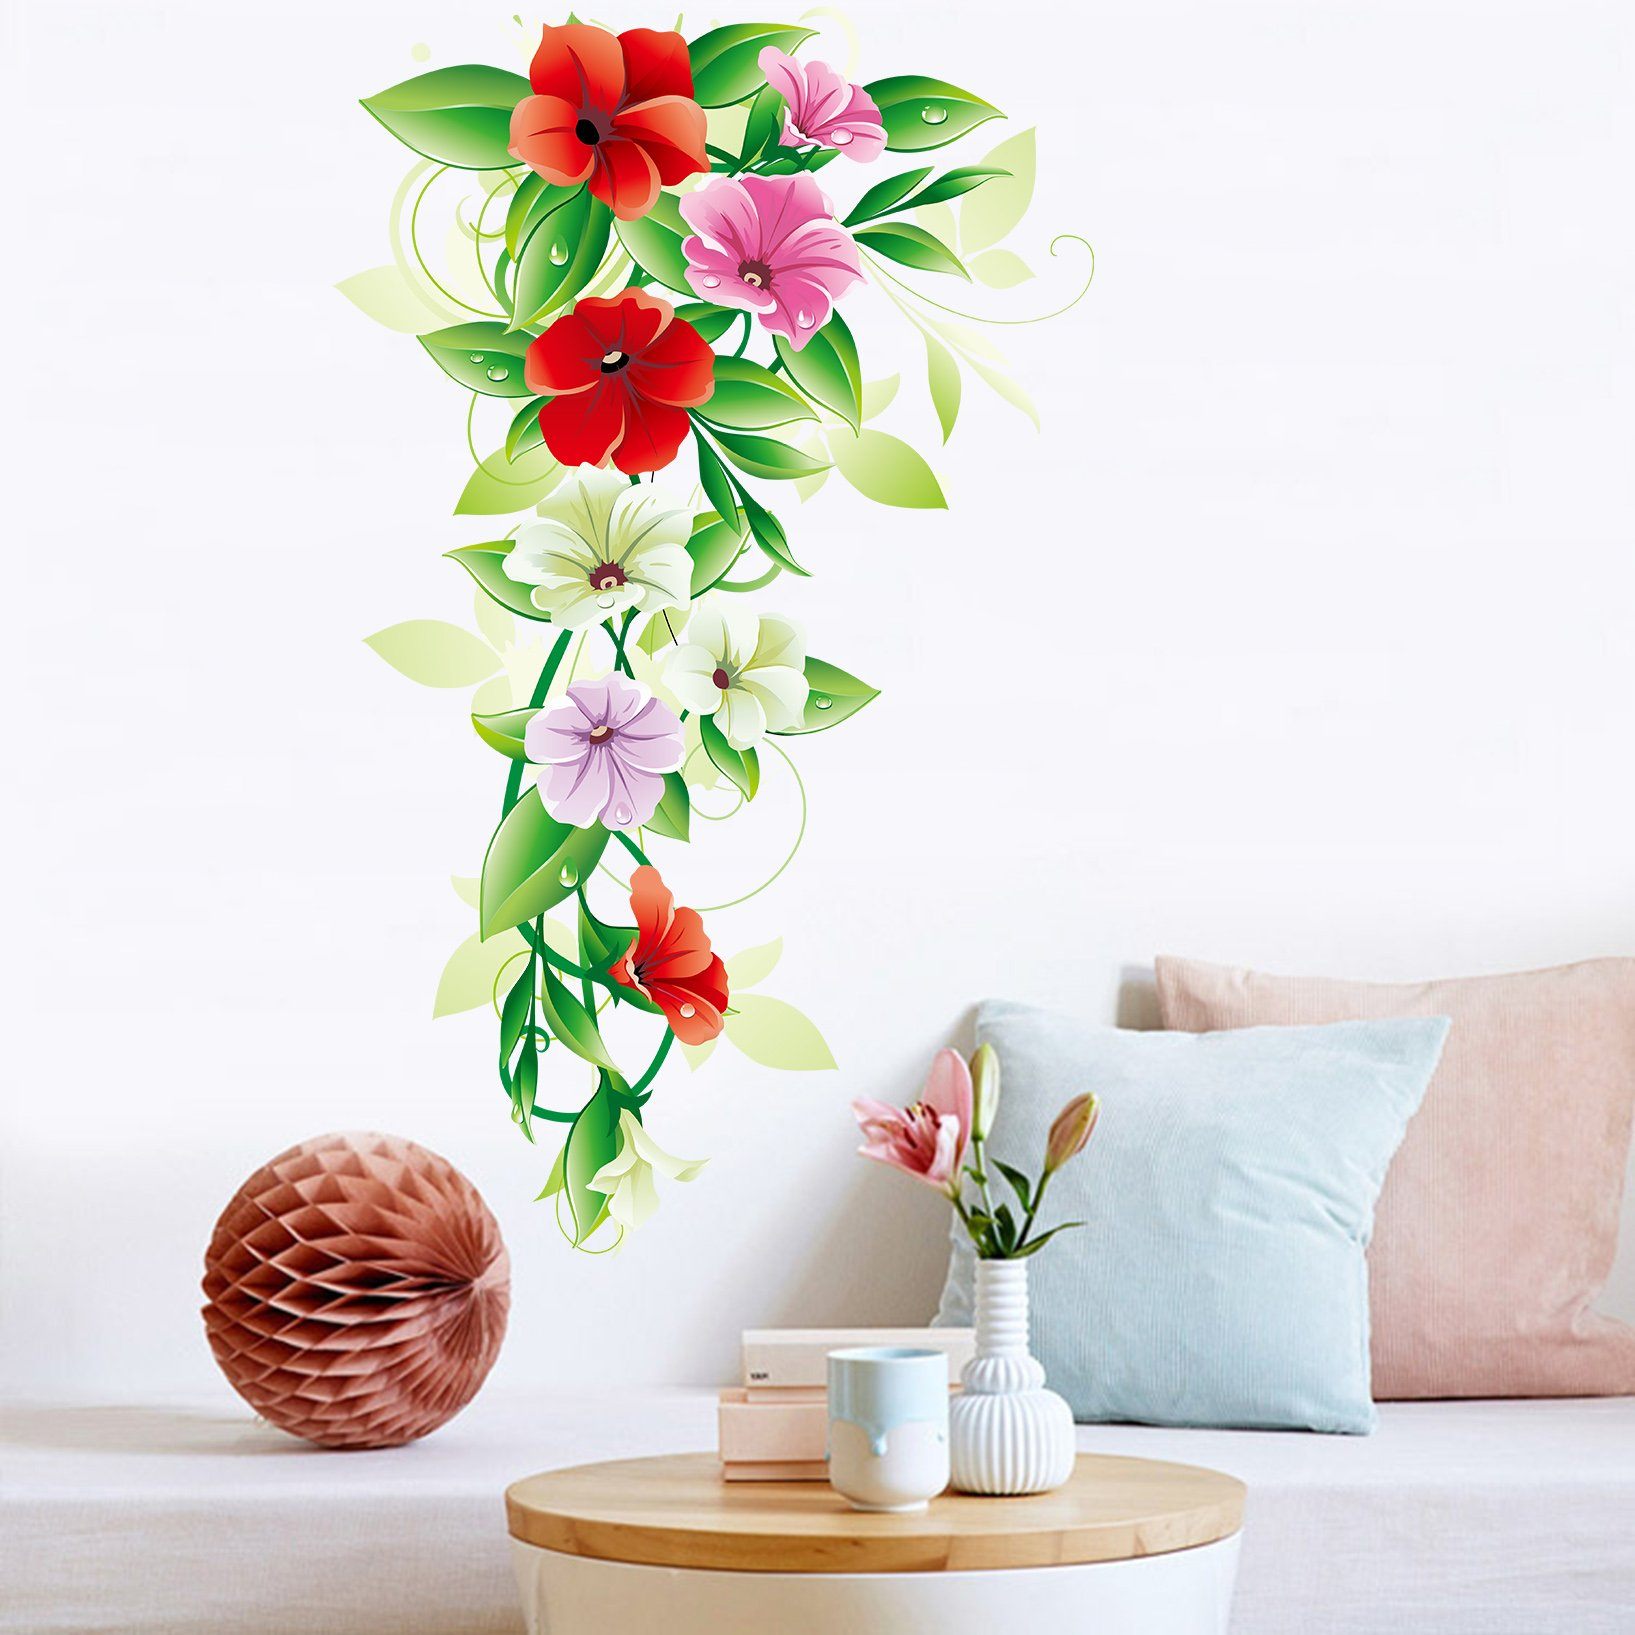 3D Different Color Flowers 074 Wall Stickers Wallpaper AJ Wallpaper 